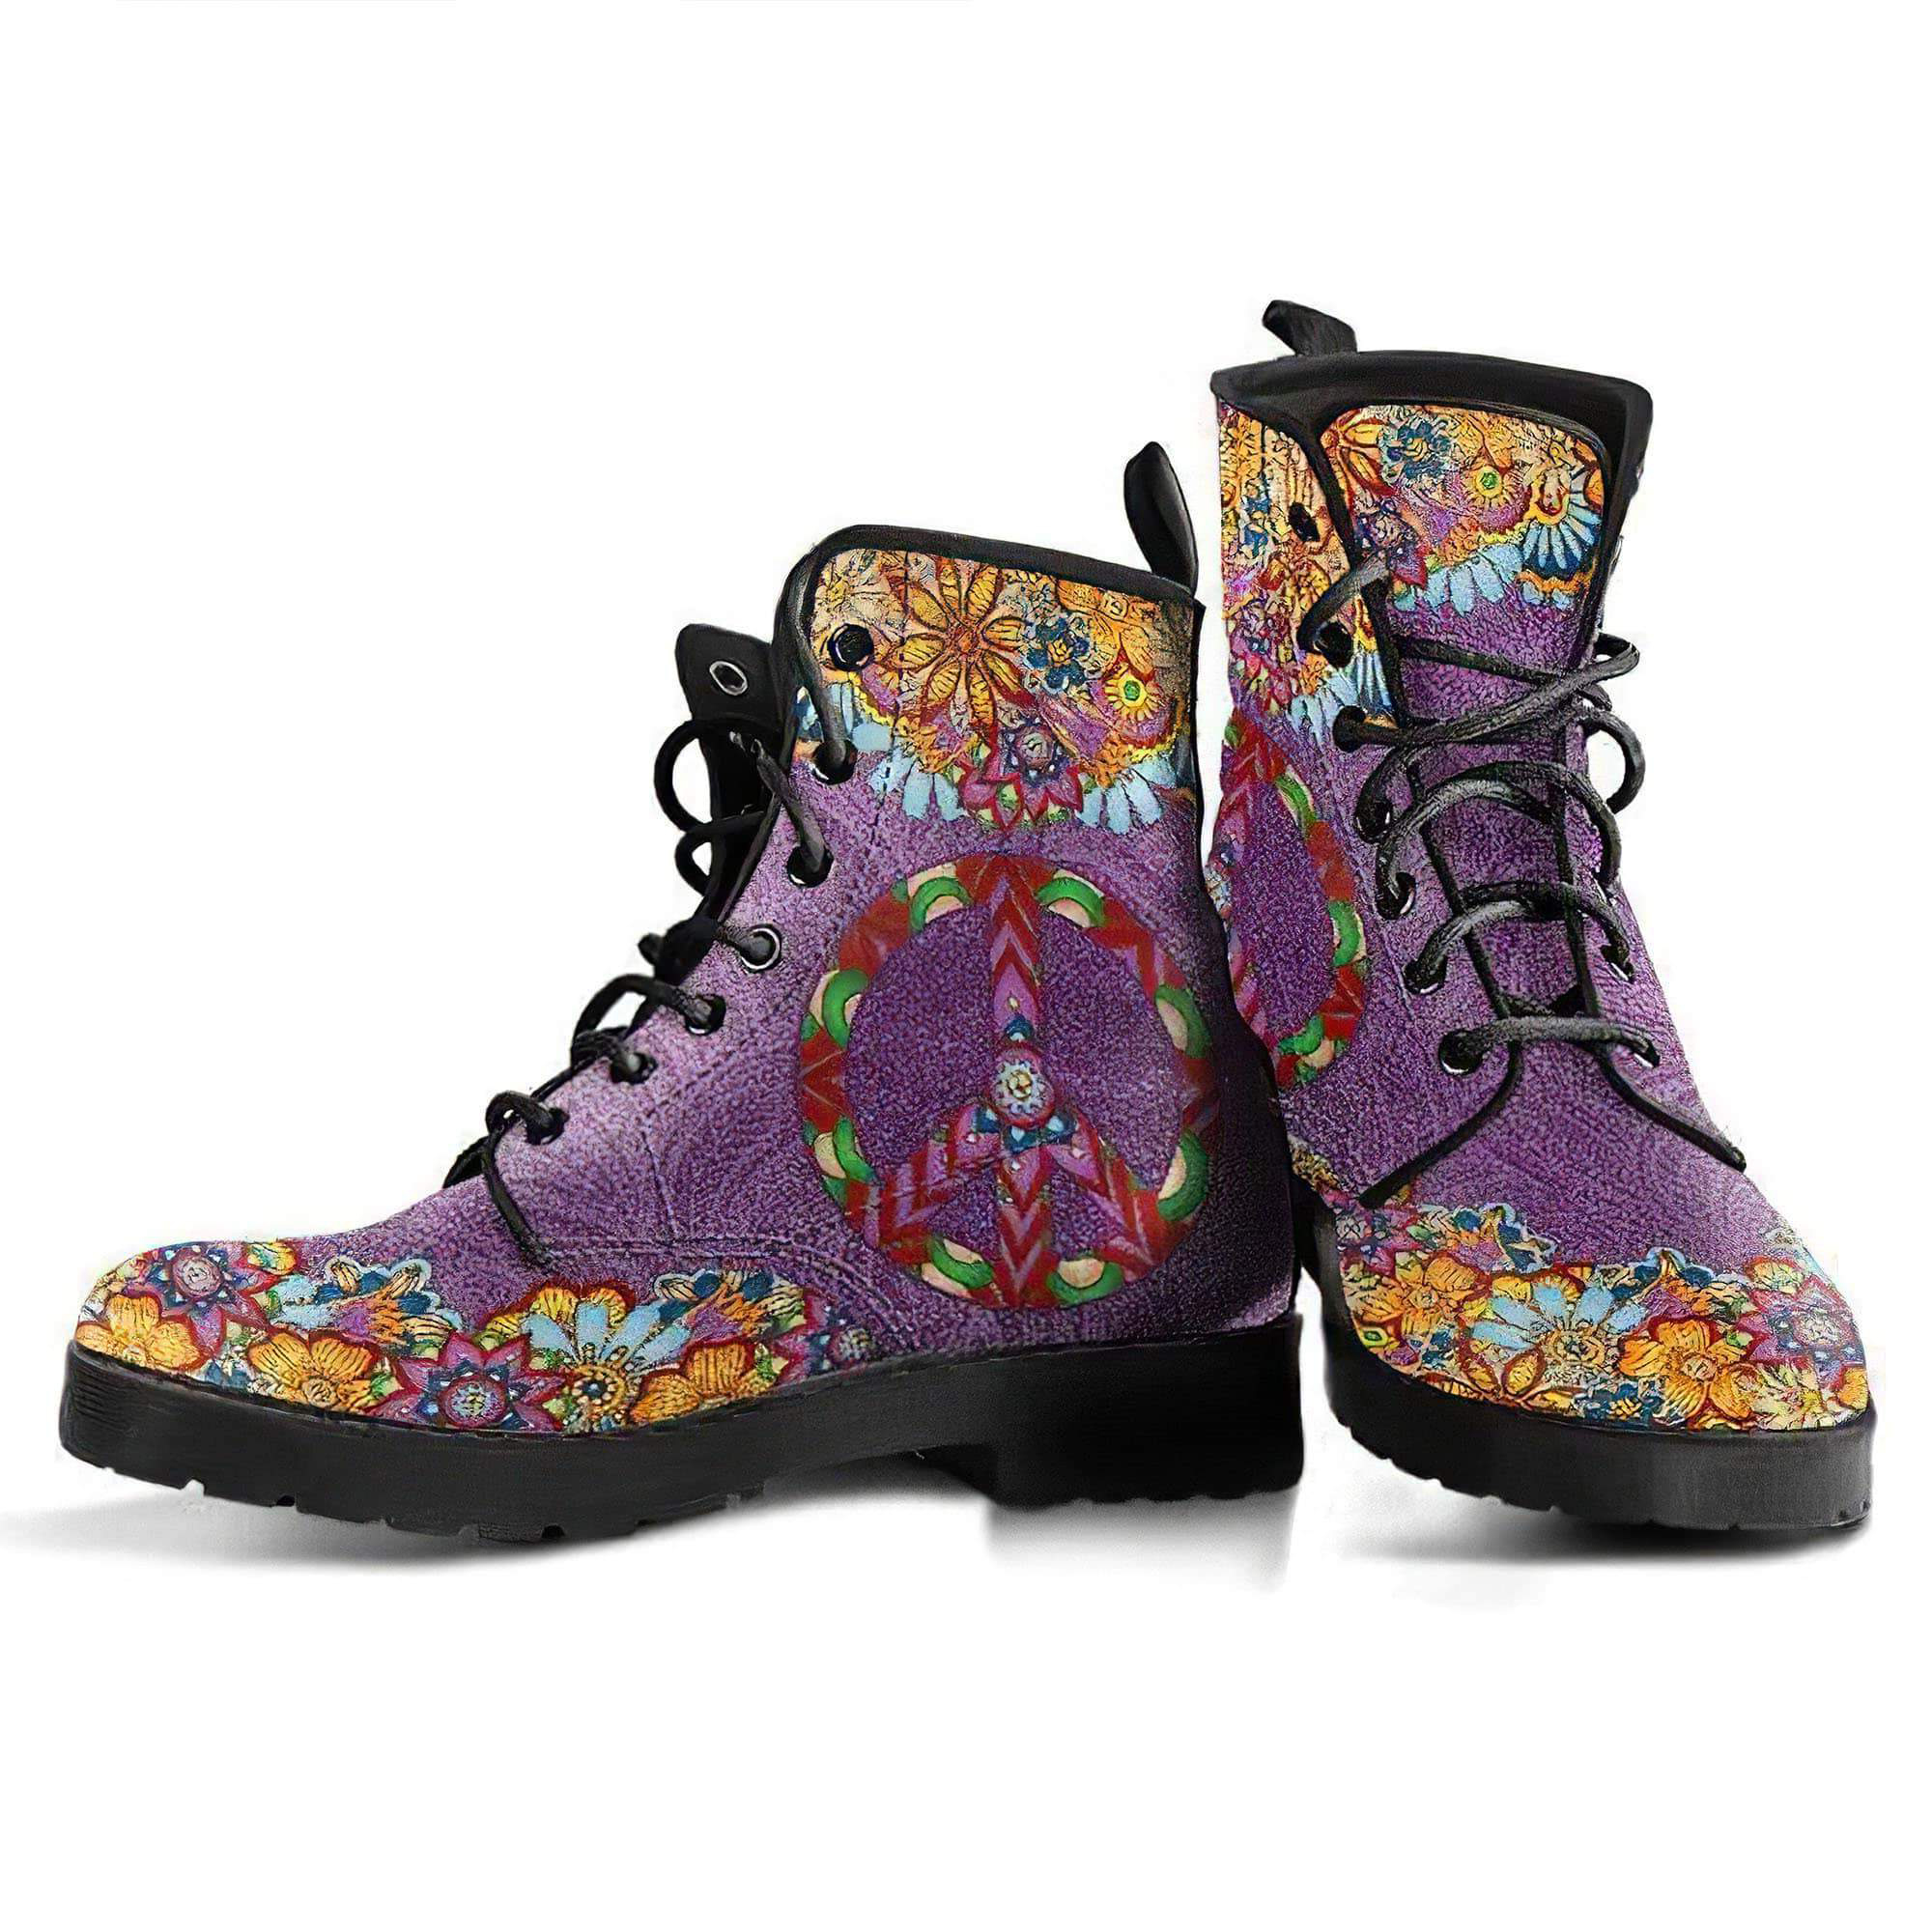 purple-paisley-mandala-handcrafted-boots-women-s-leather-boots-12051938410557.jpg